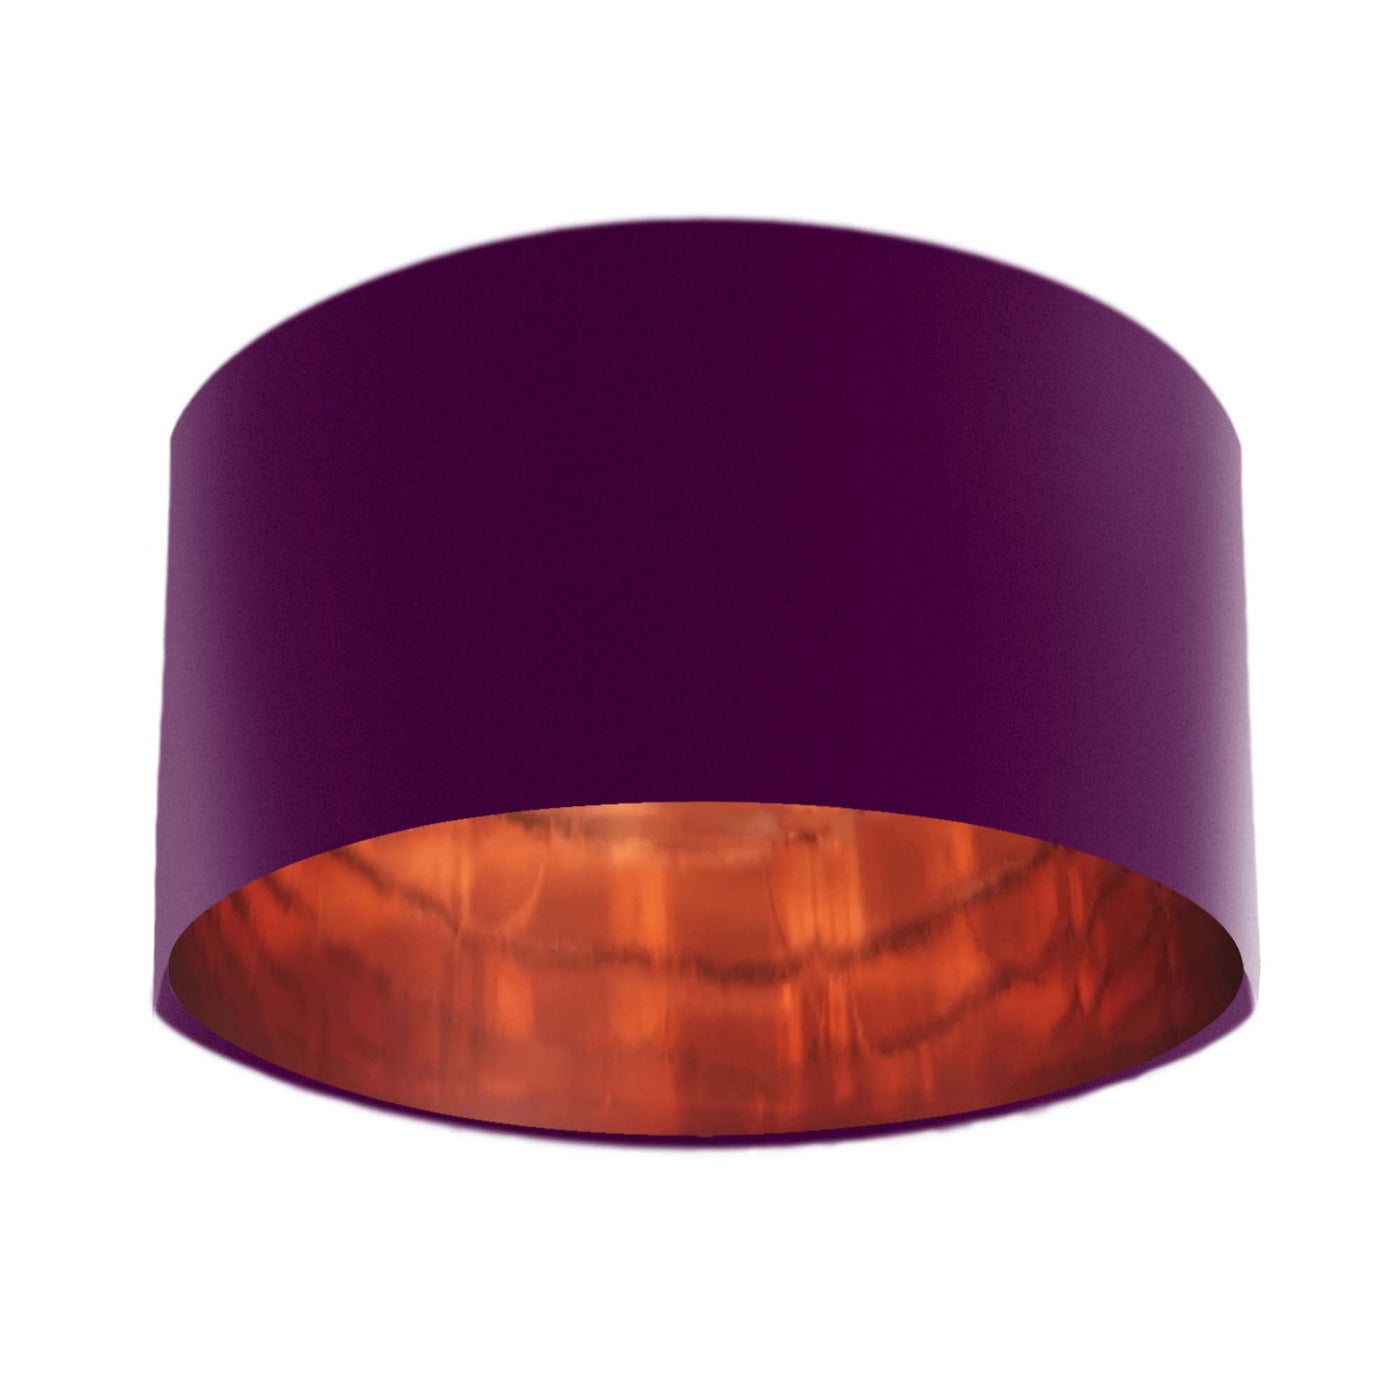 Mulberry Purple Velvet Light shade with Copper Lining